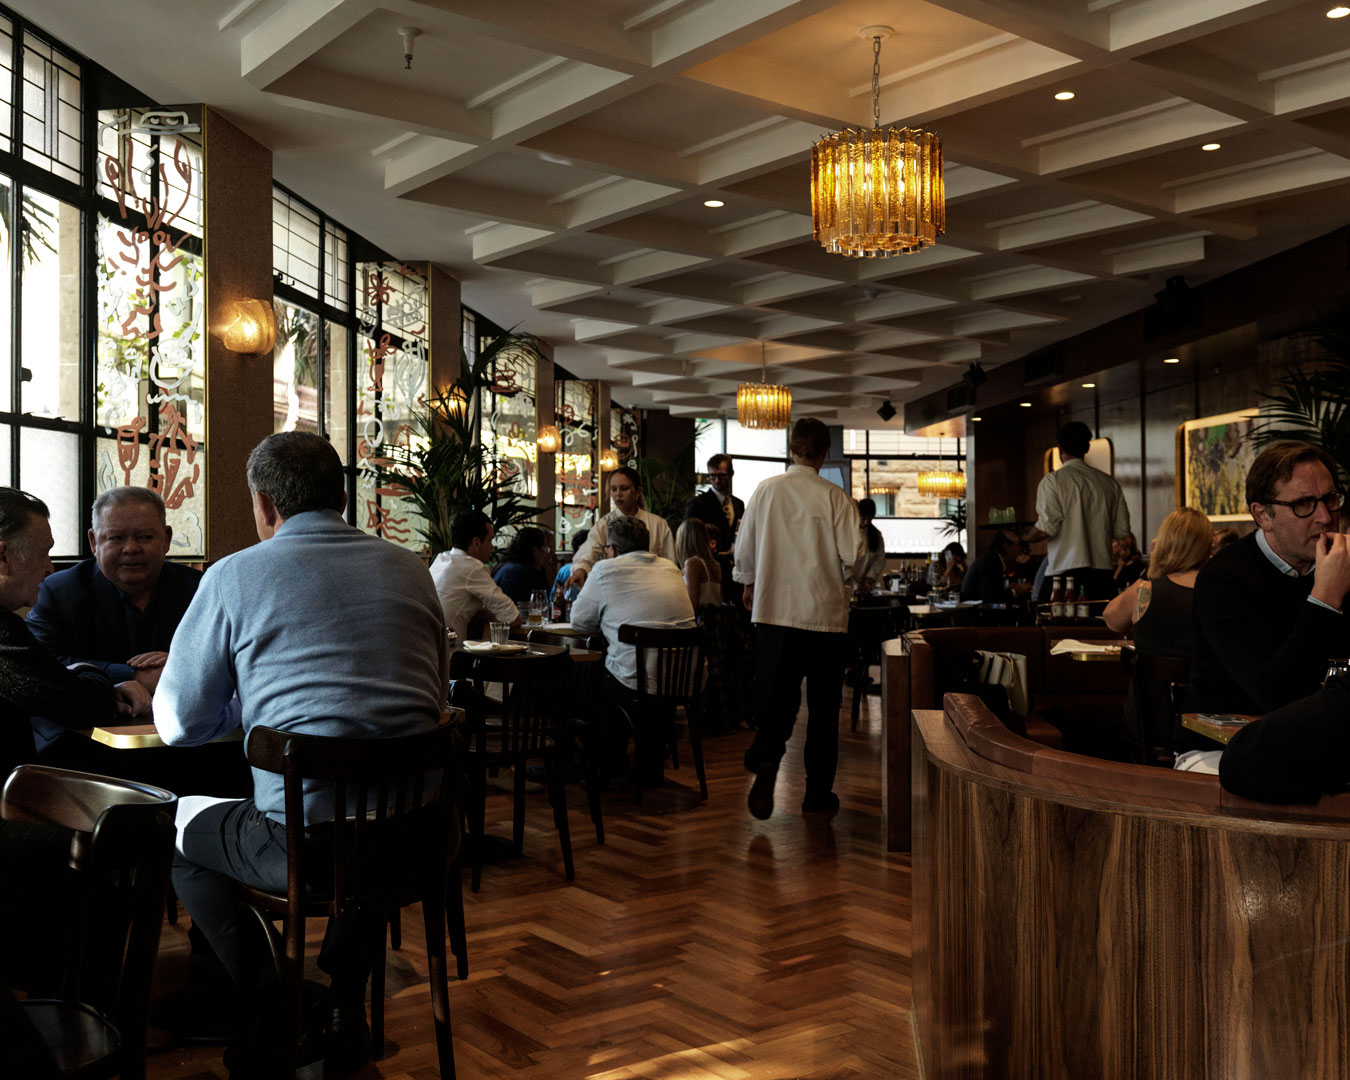 The Art Deco-style dining room at Clam Bar, one of the best restaurants in Sydney